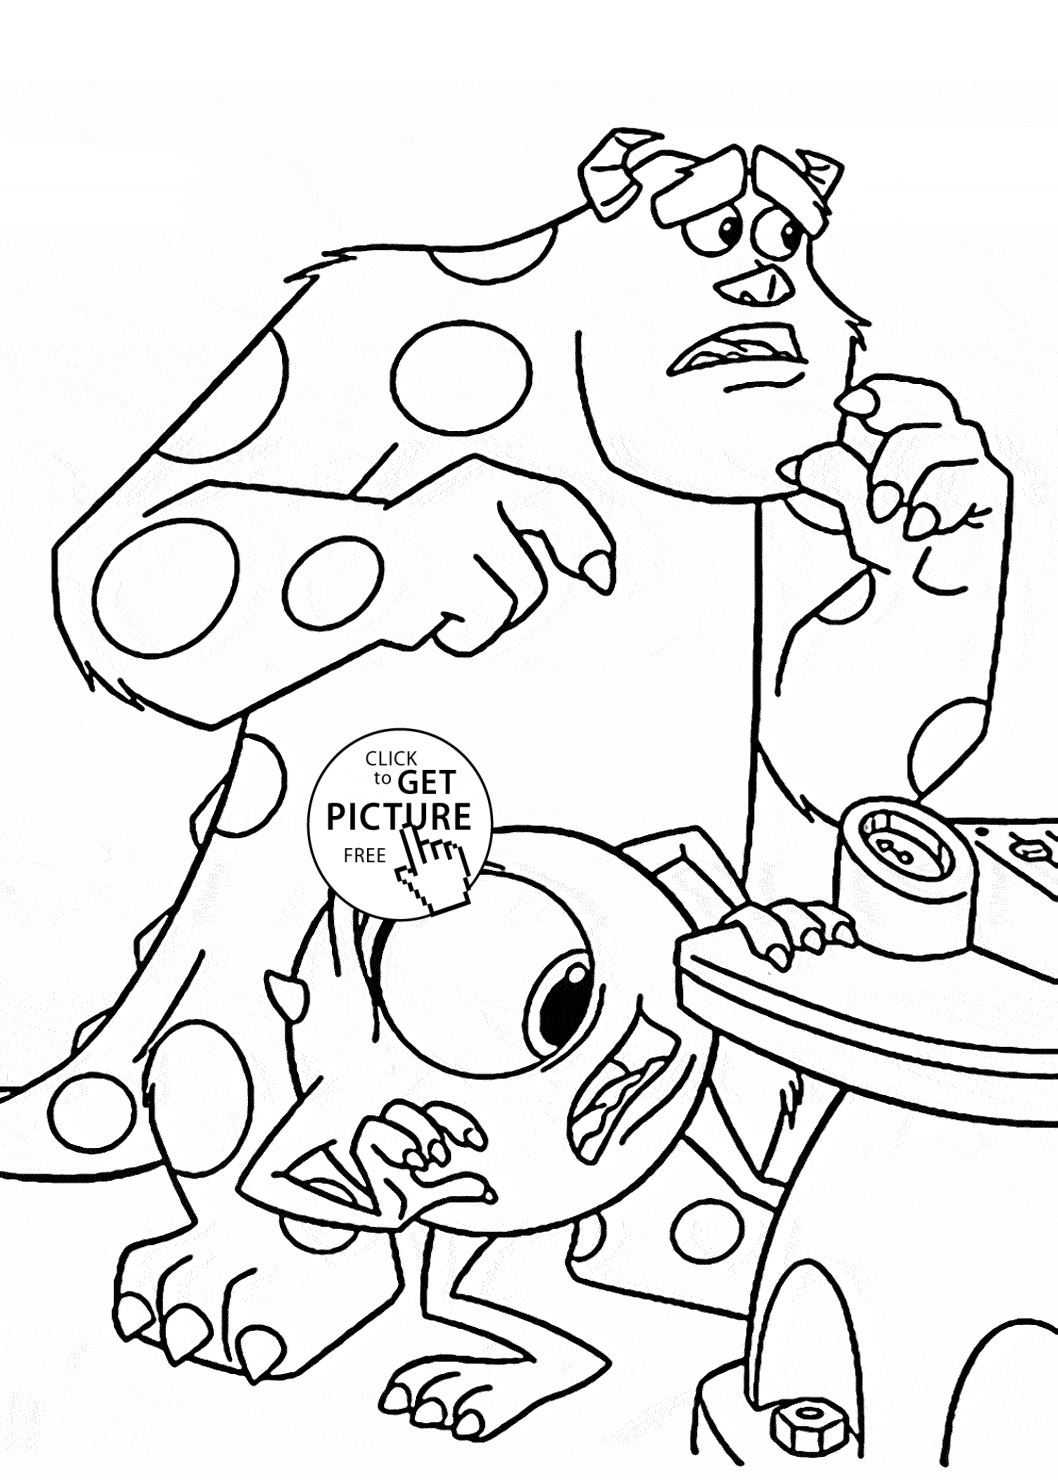 Coloring Pages For Toddlers Disney - 219+ DXF Include